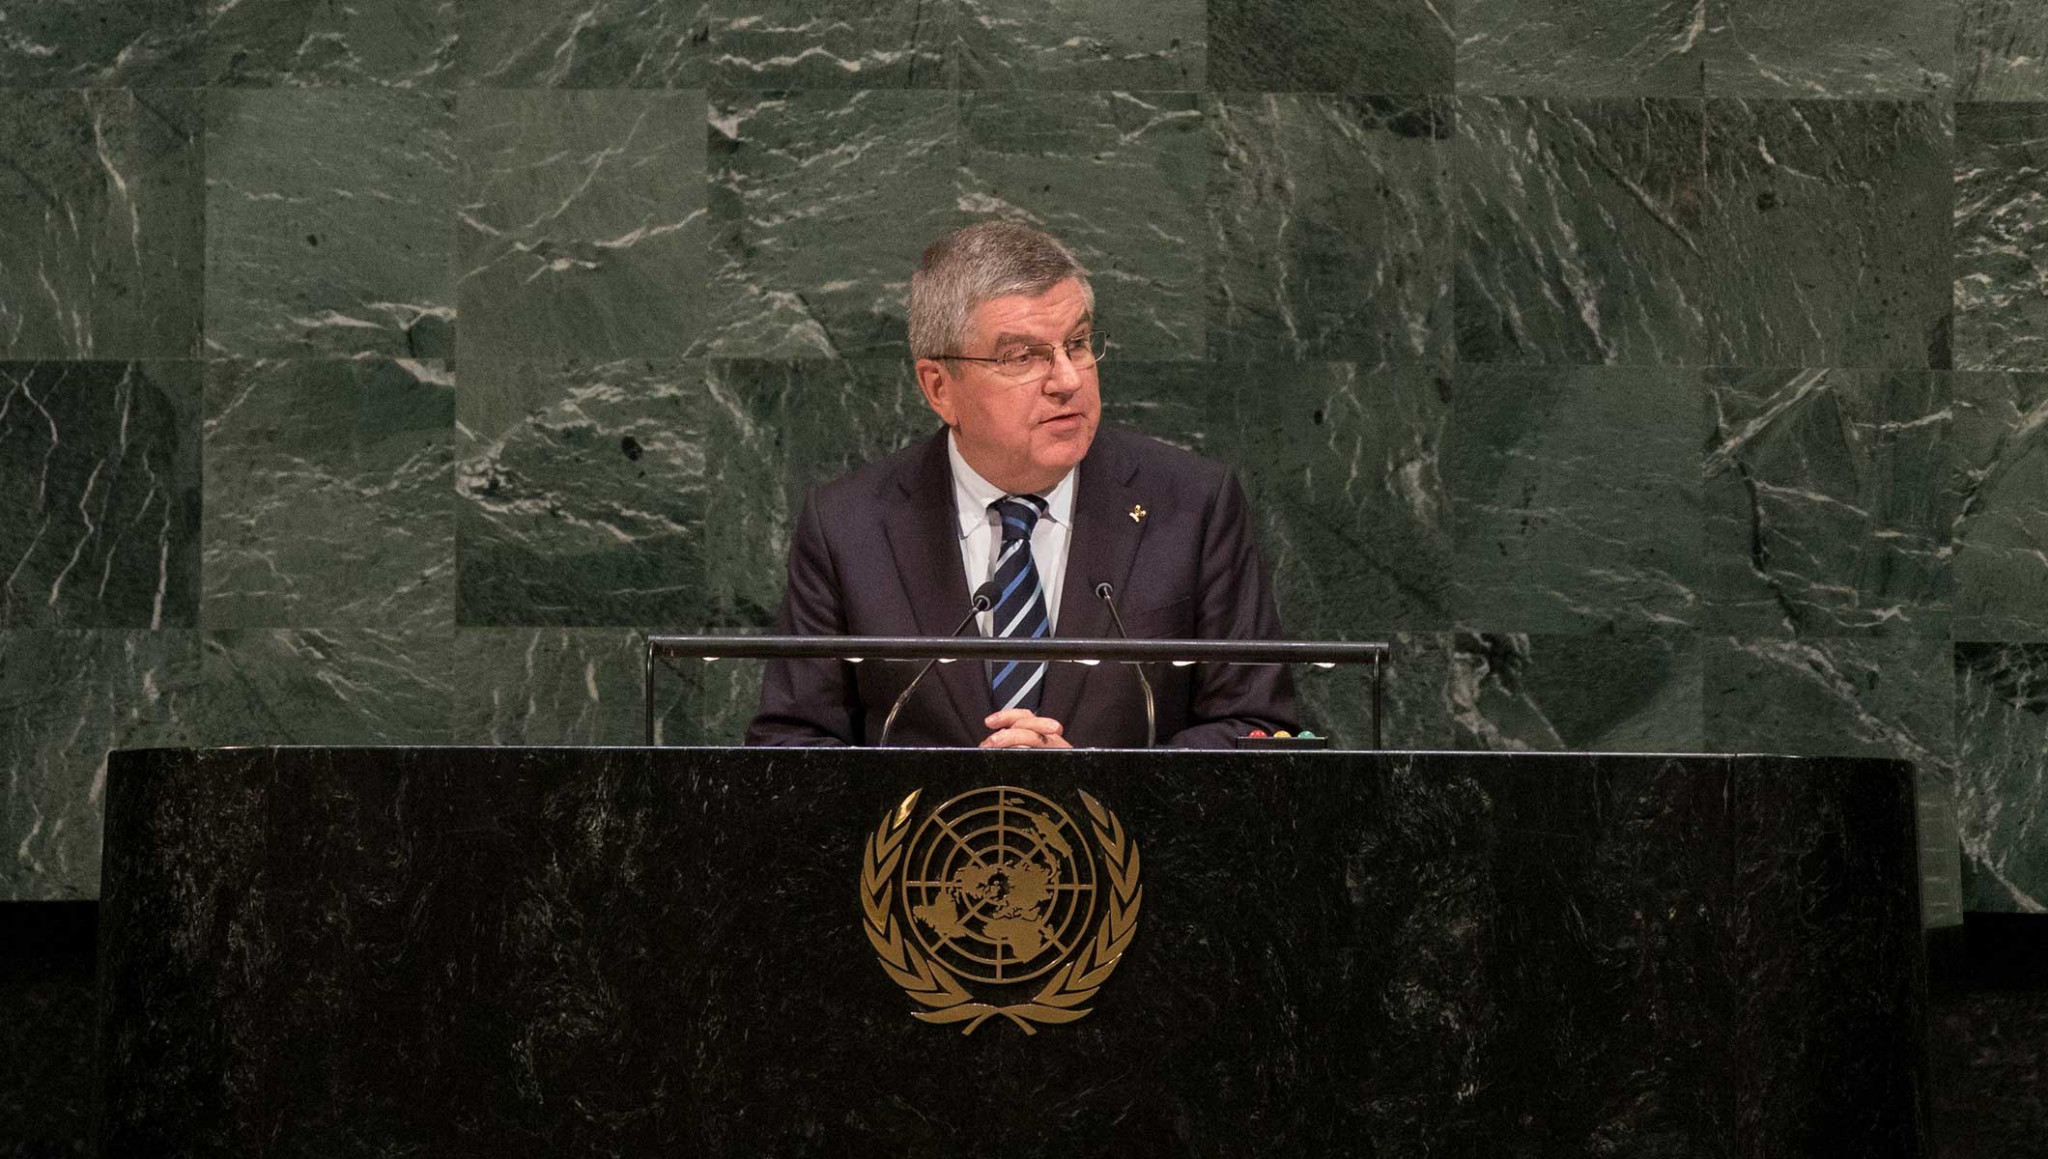 International Olympic Committee President Thomas Bach spoke at the Assembly ©IOC